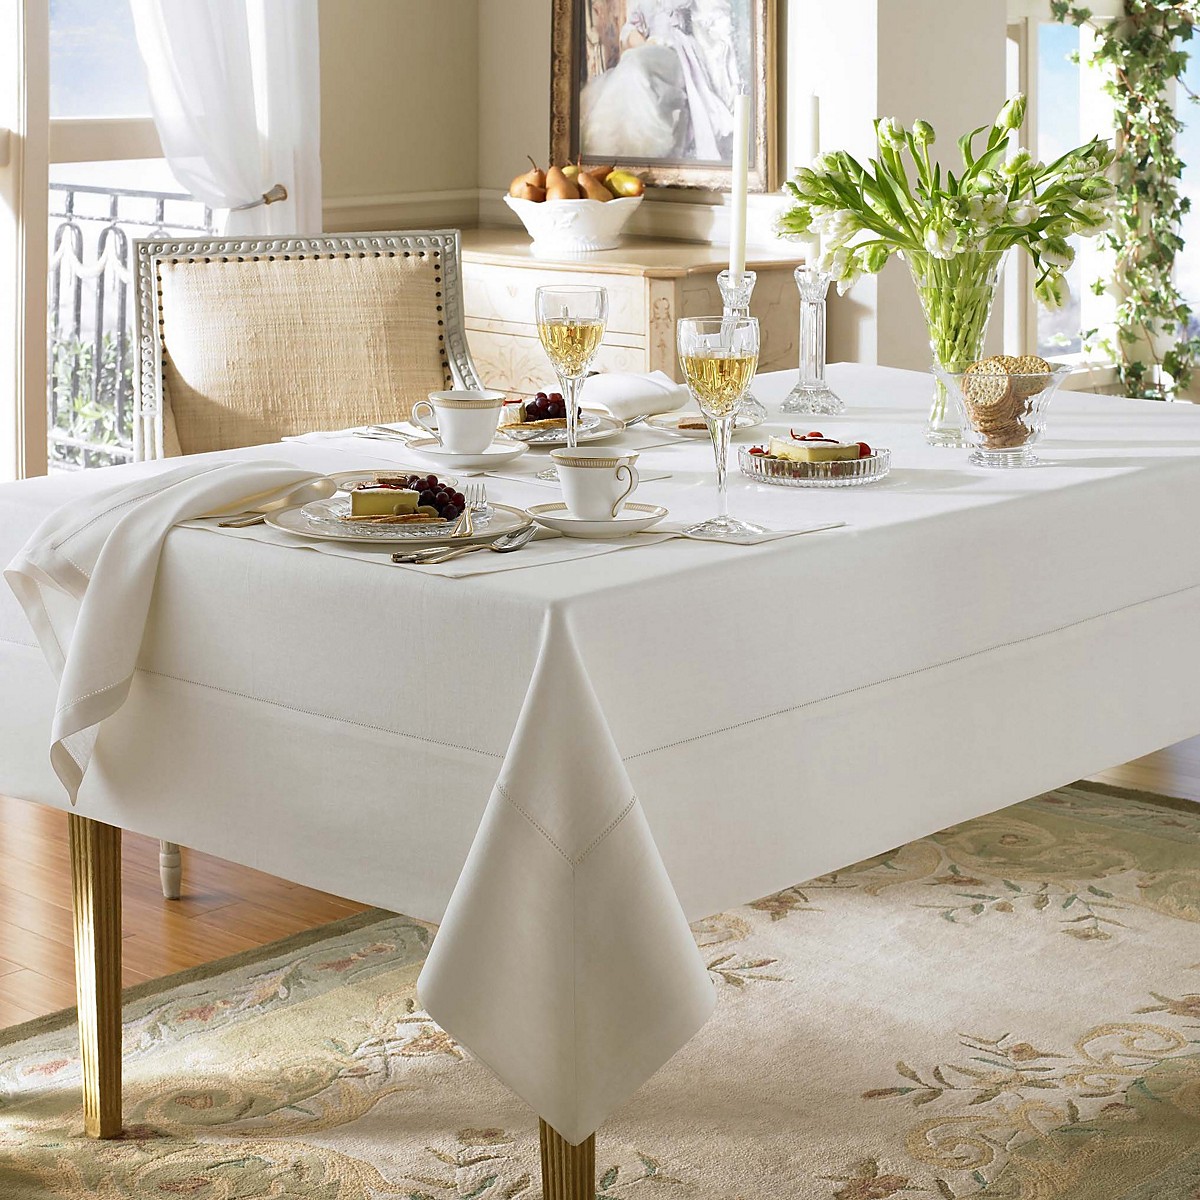 Table Linens Bellingham Cleaners, Dining Room Tablecloth Ideas